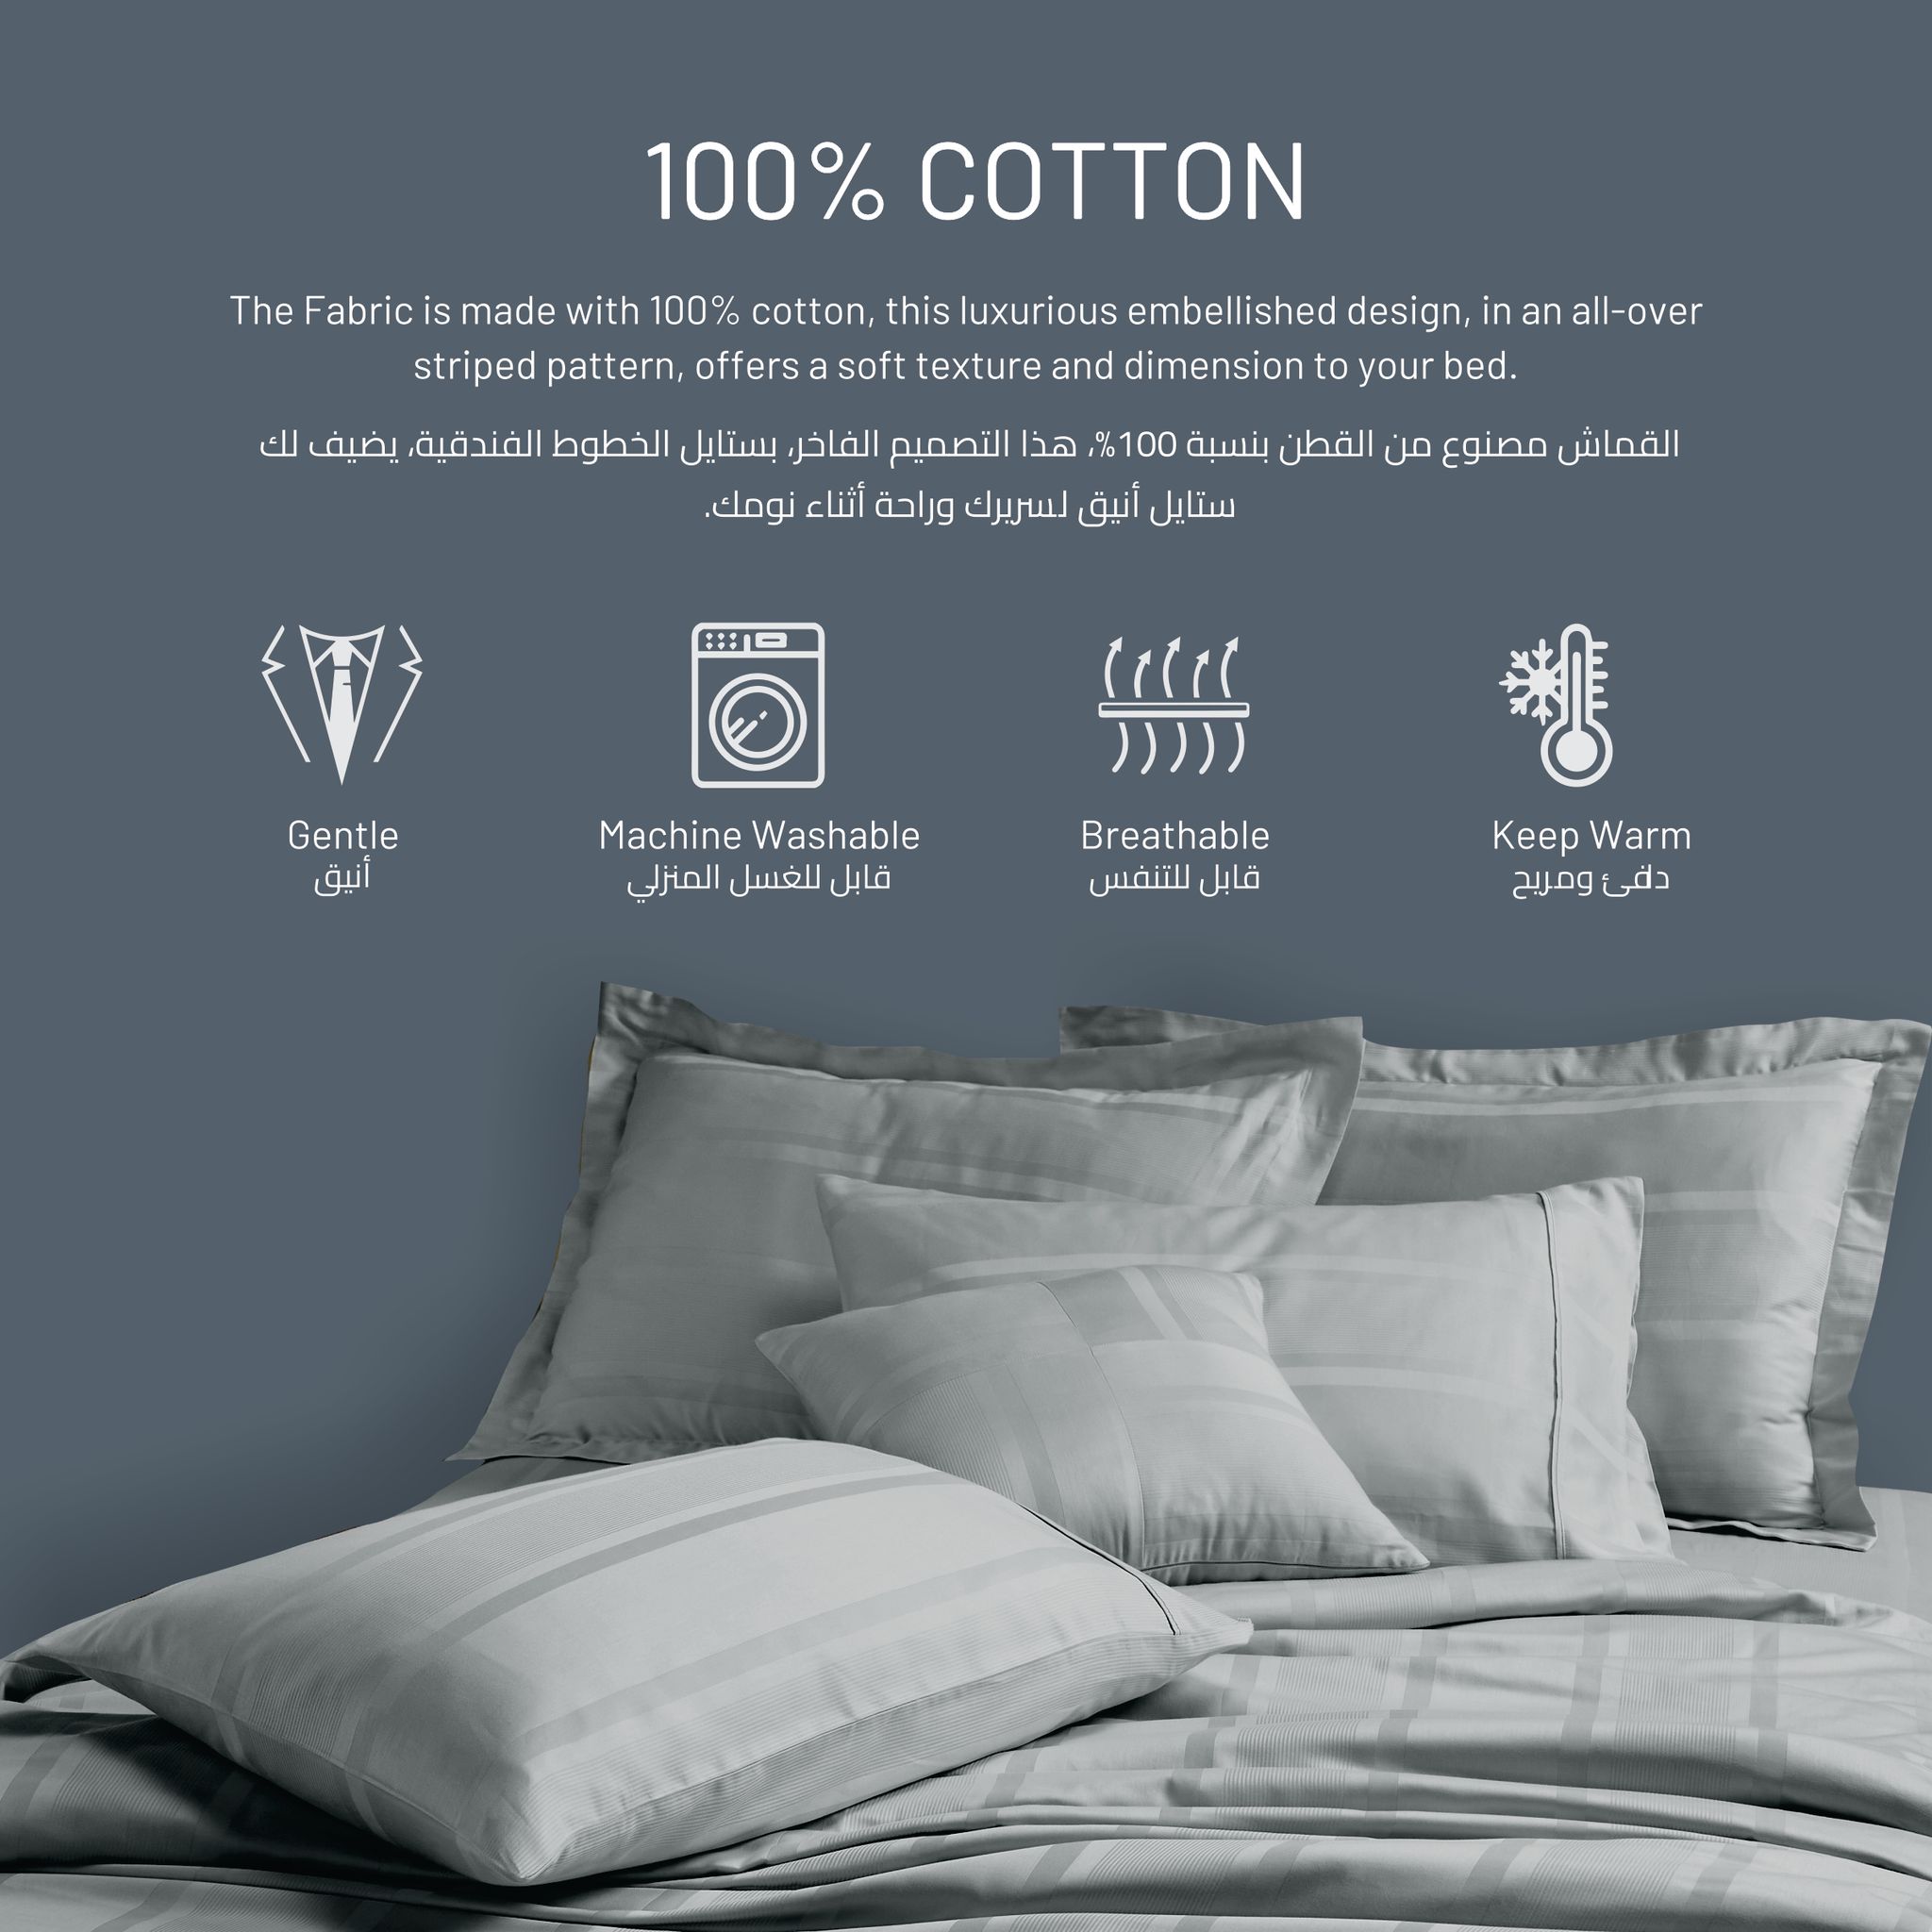 300 Thread Count 100% Natural Cotton Striped Comforter Set 8-Piece King Gray